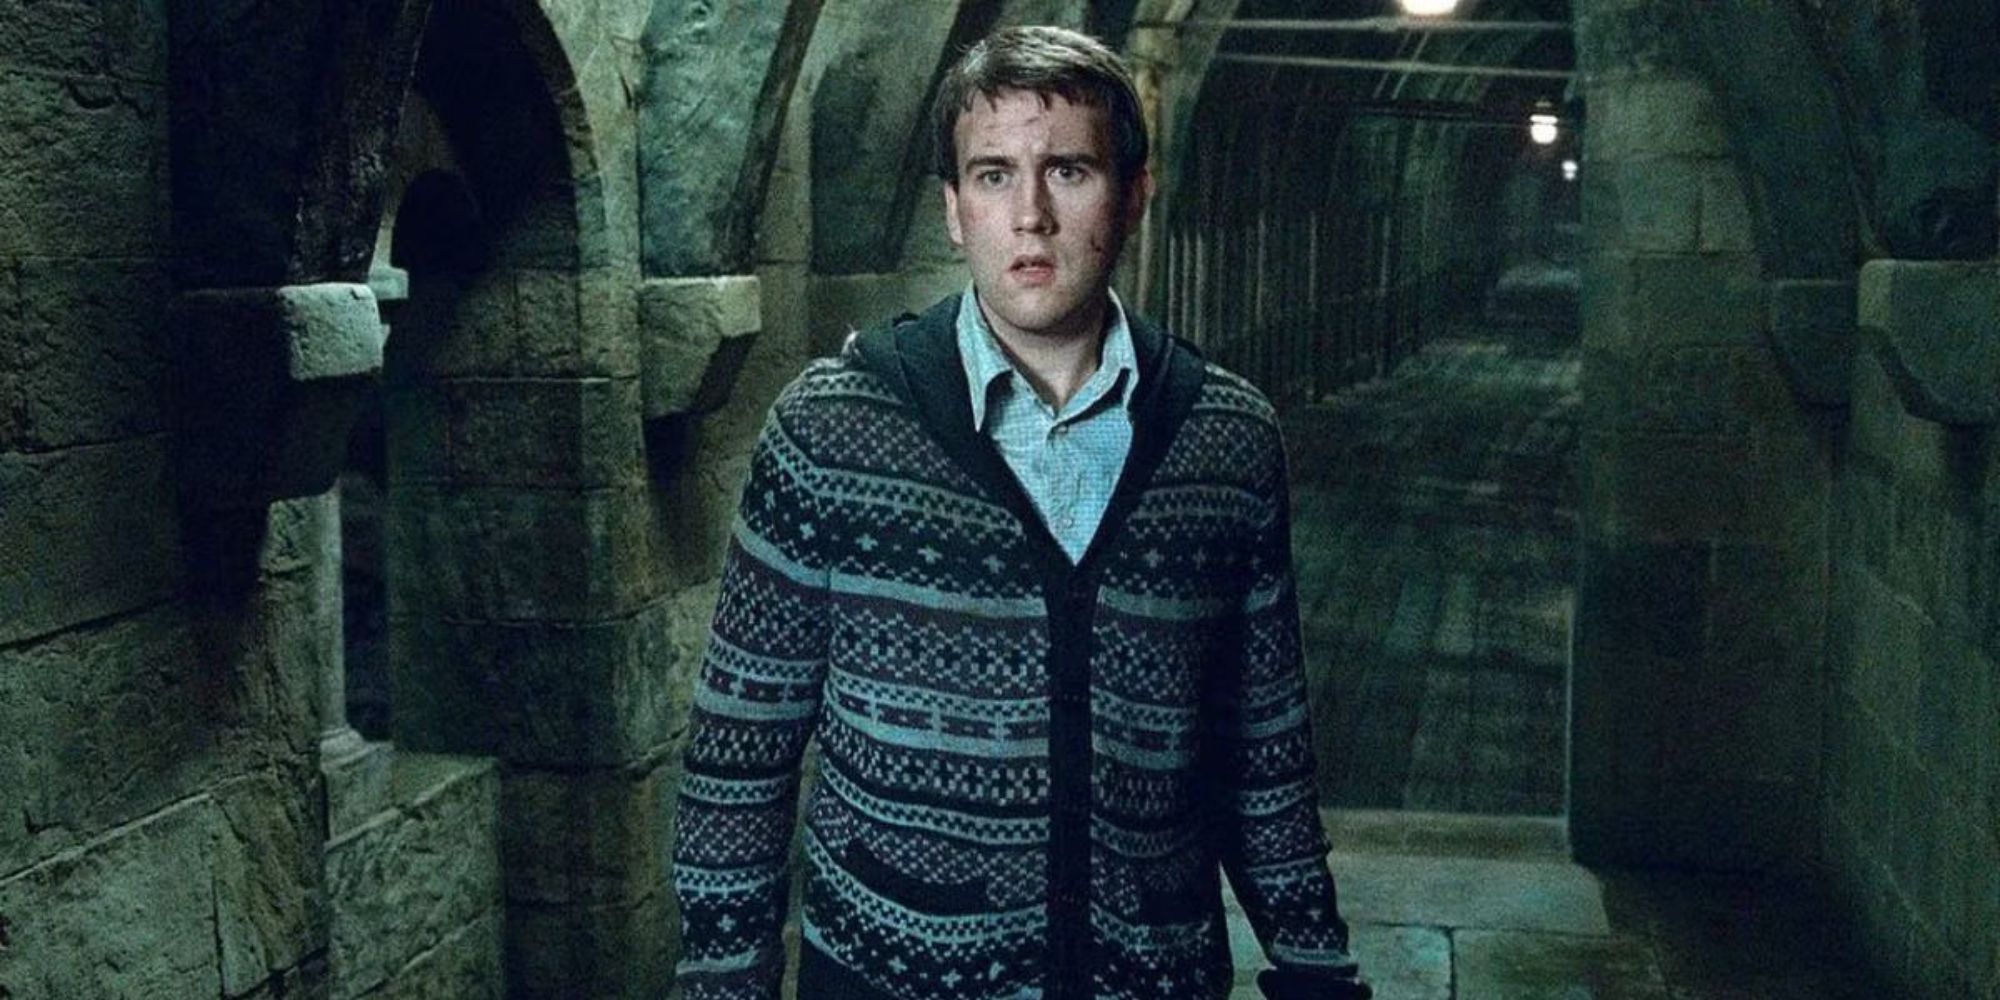 Matthew Lewis as Neville Longbottom in Harry Potter and the Deathly Hallows: Part 2